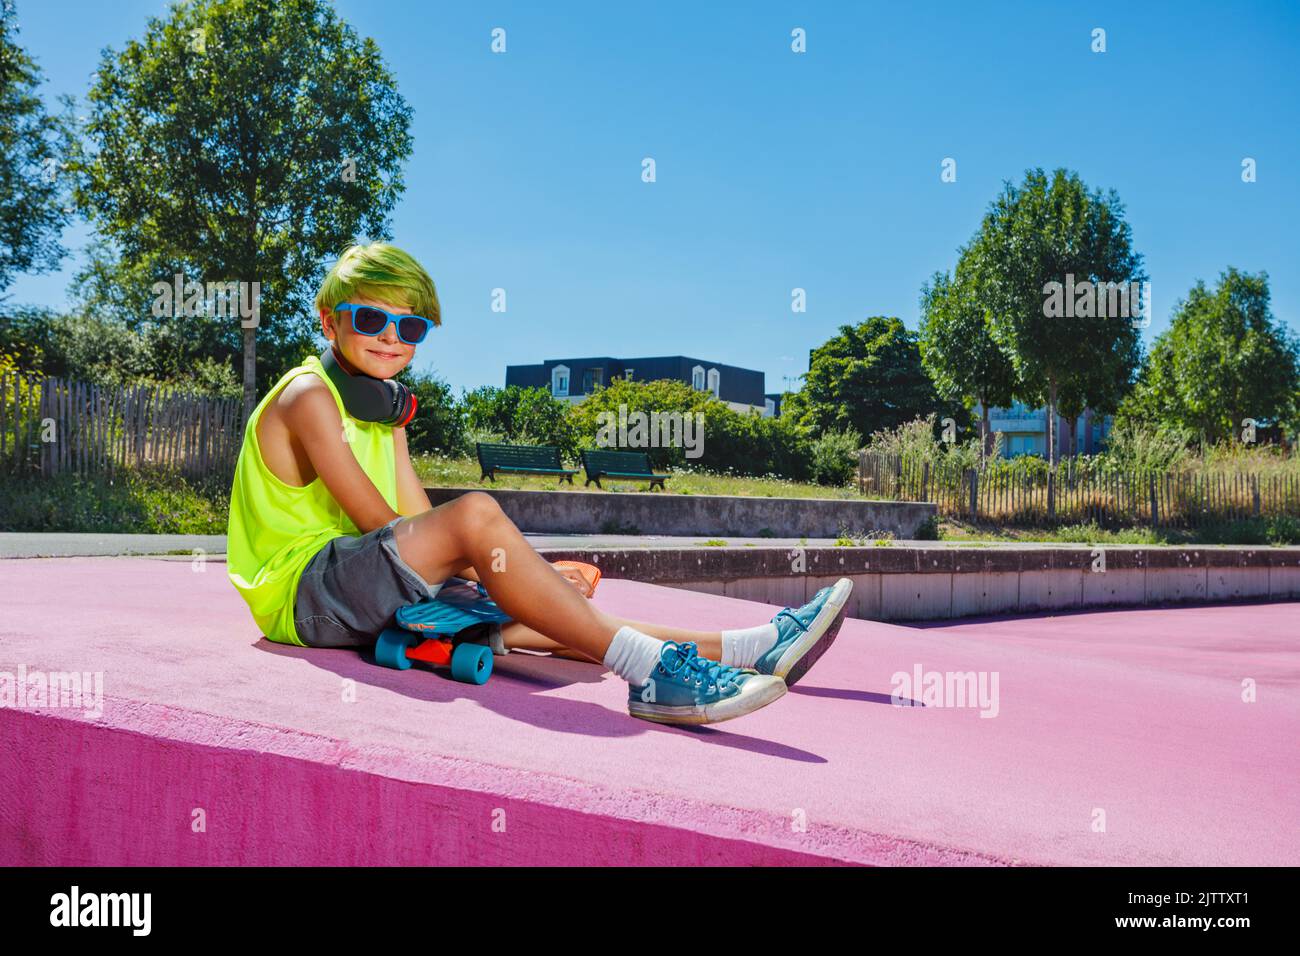 Handsome young preteen boy with green hair sit on ramp Stock Photo